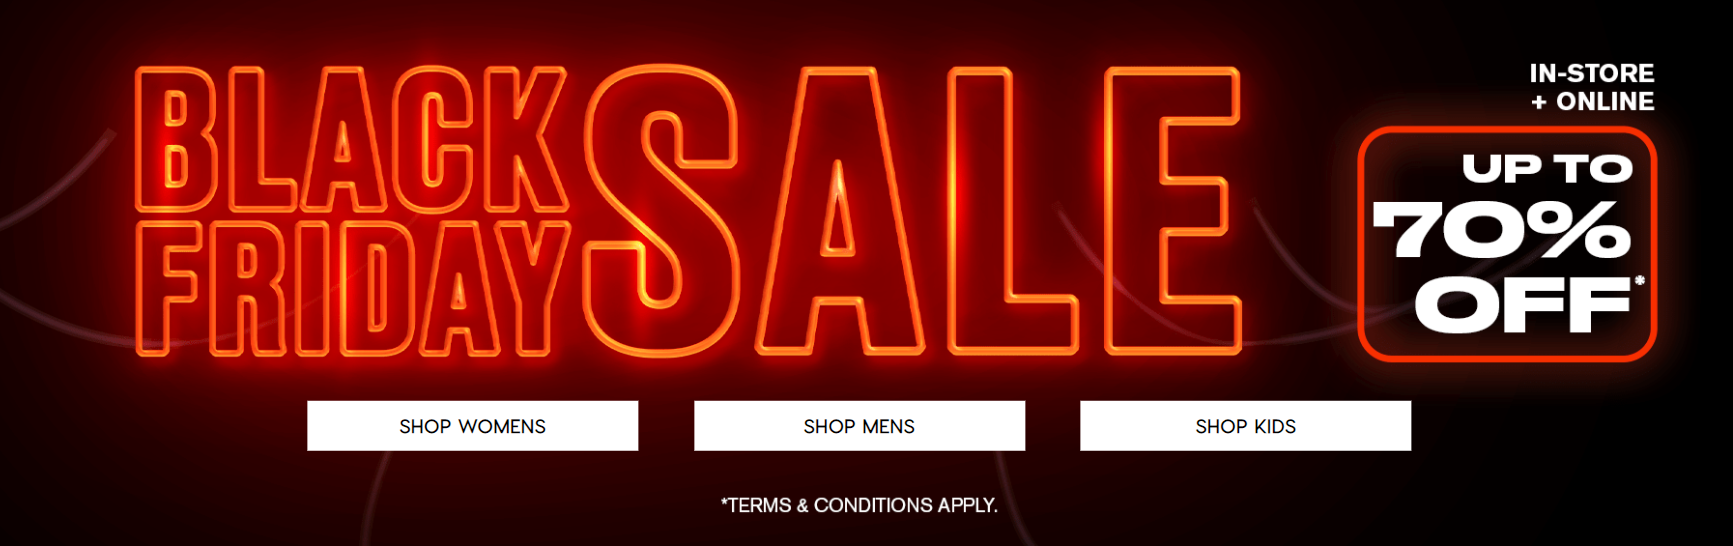 Save up to 60% OFF on men, women & kids styles